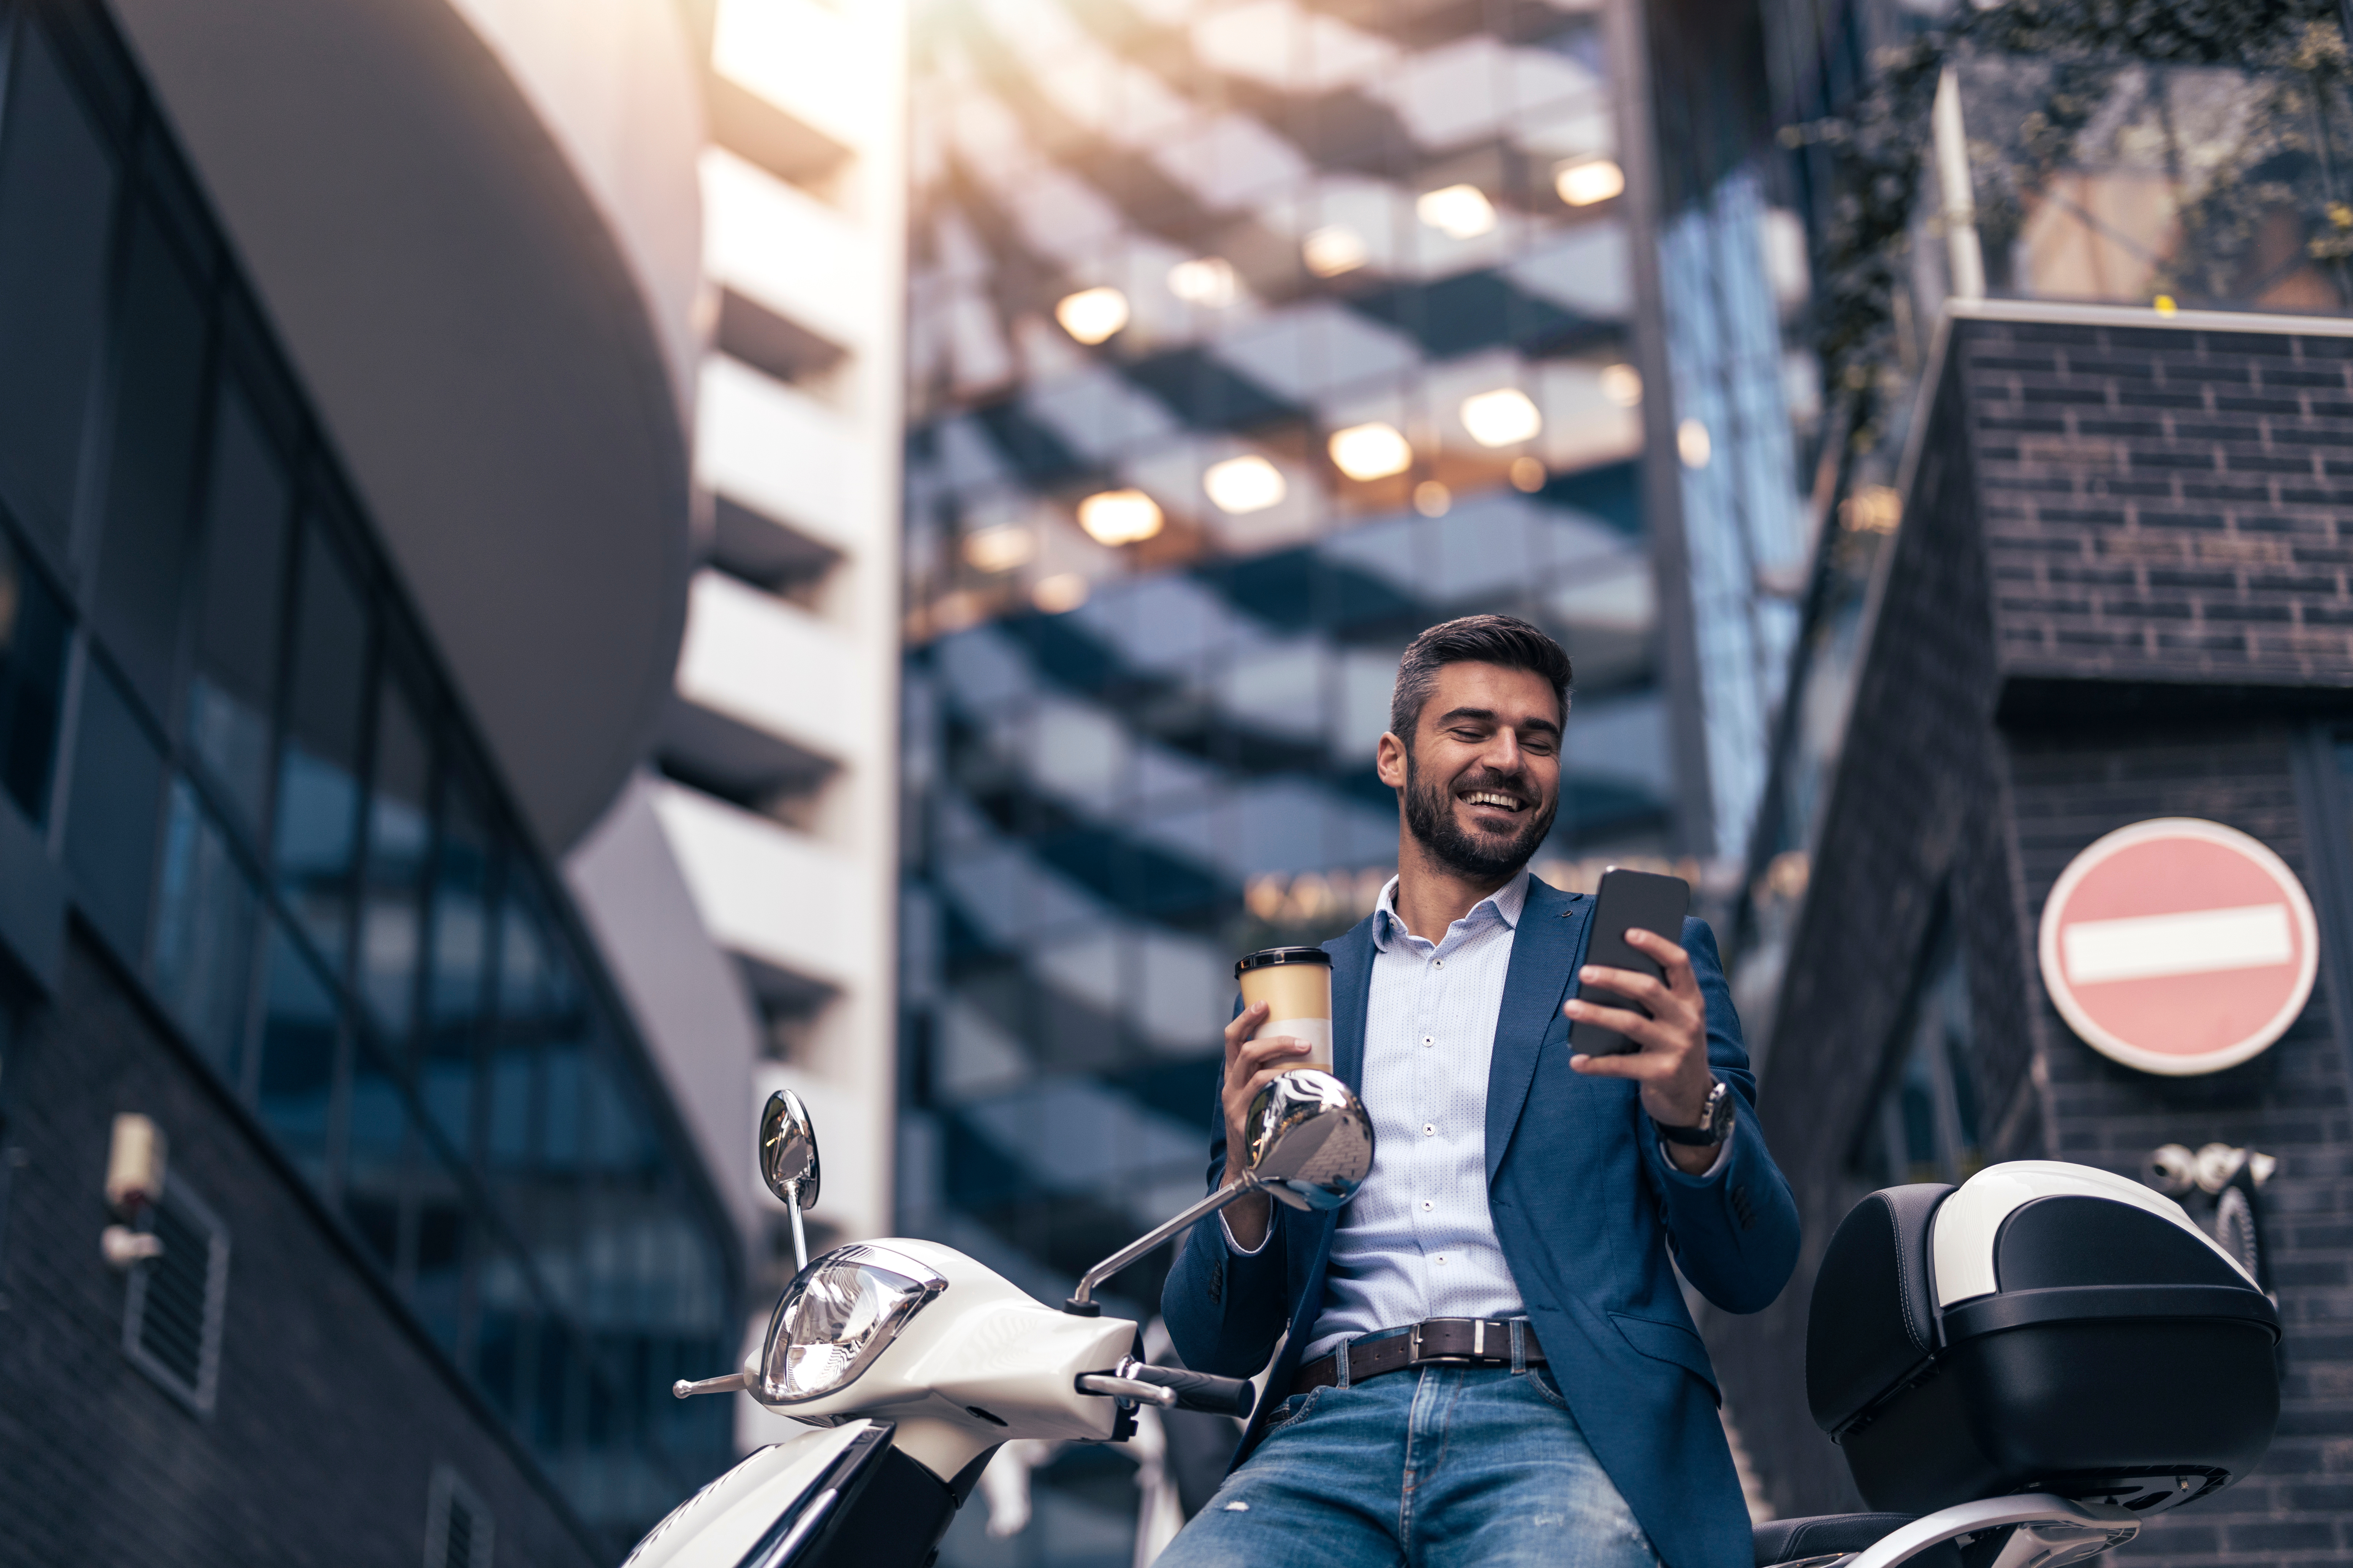 Image of man smiling with coffee and iphone by a motorcycle